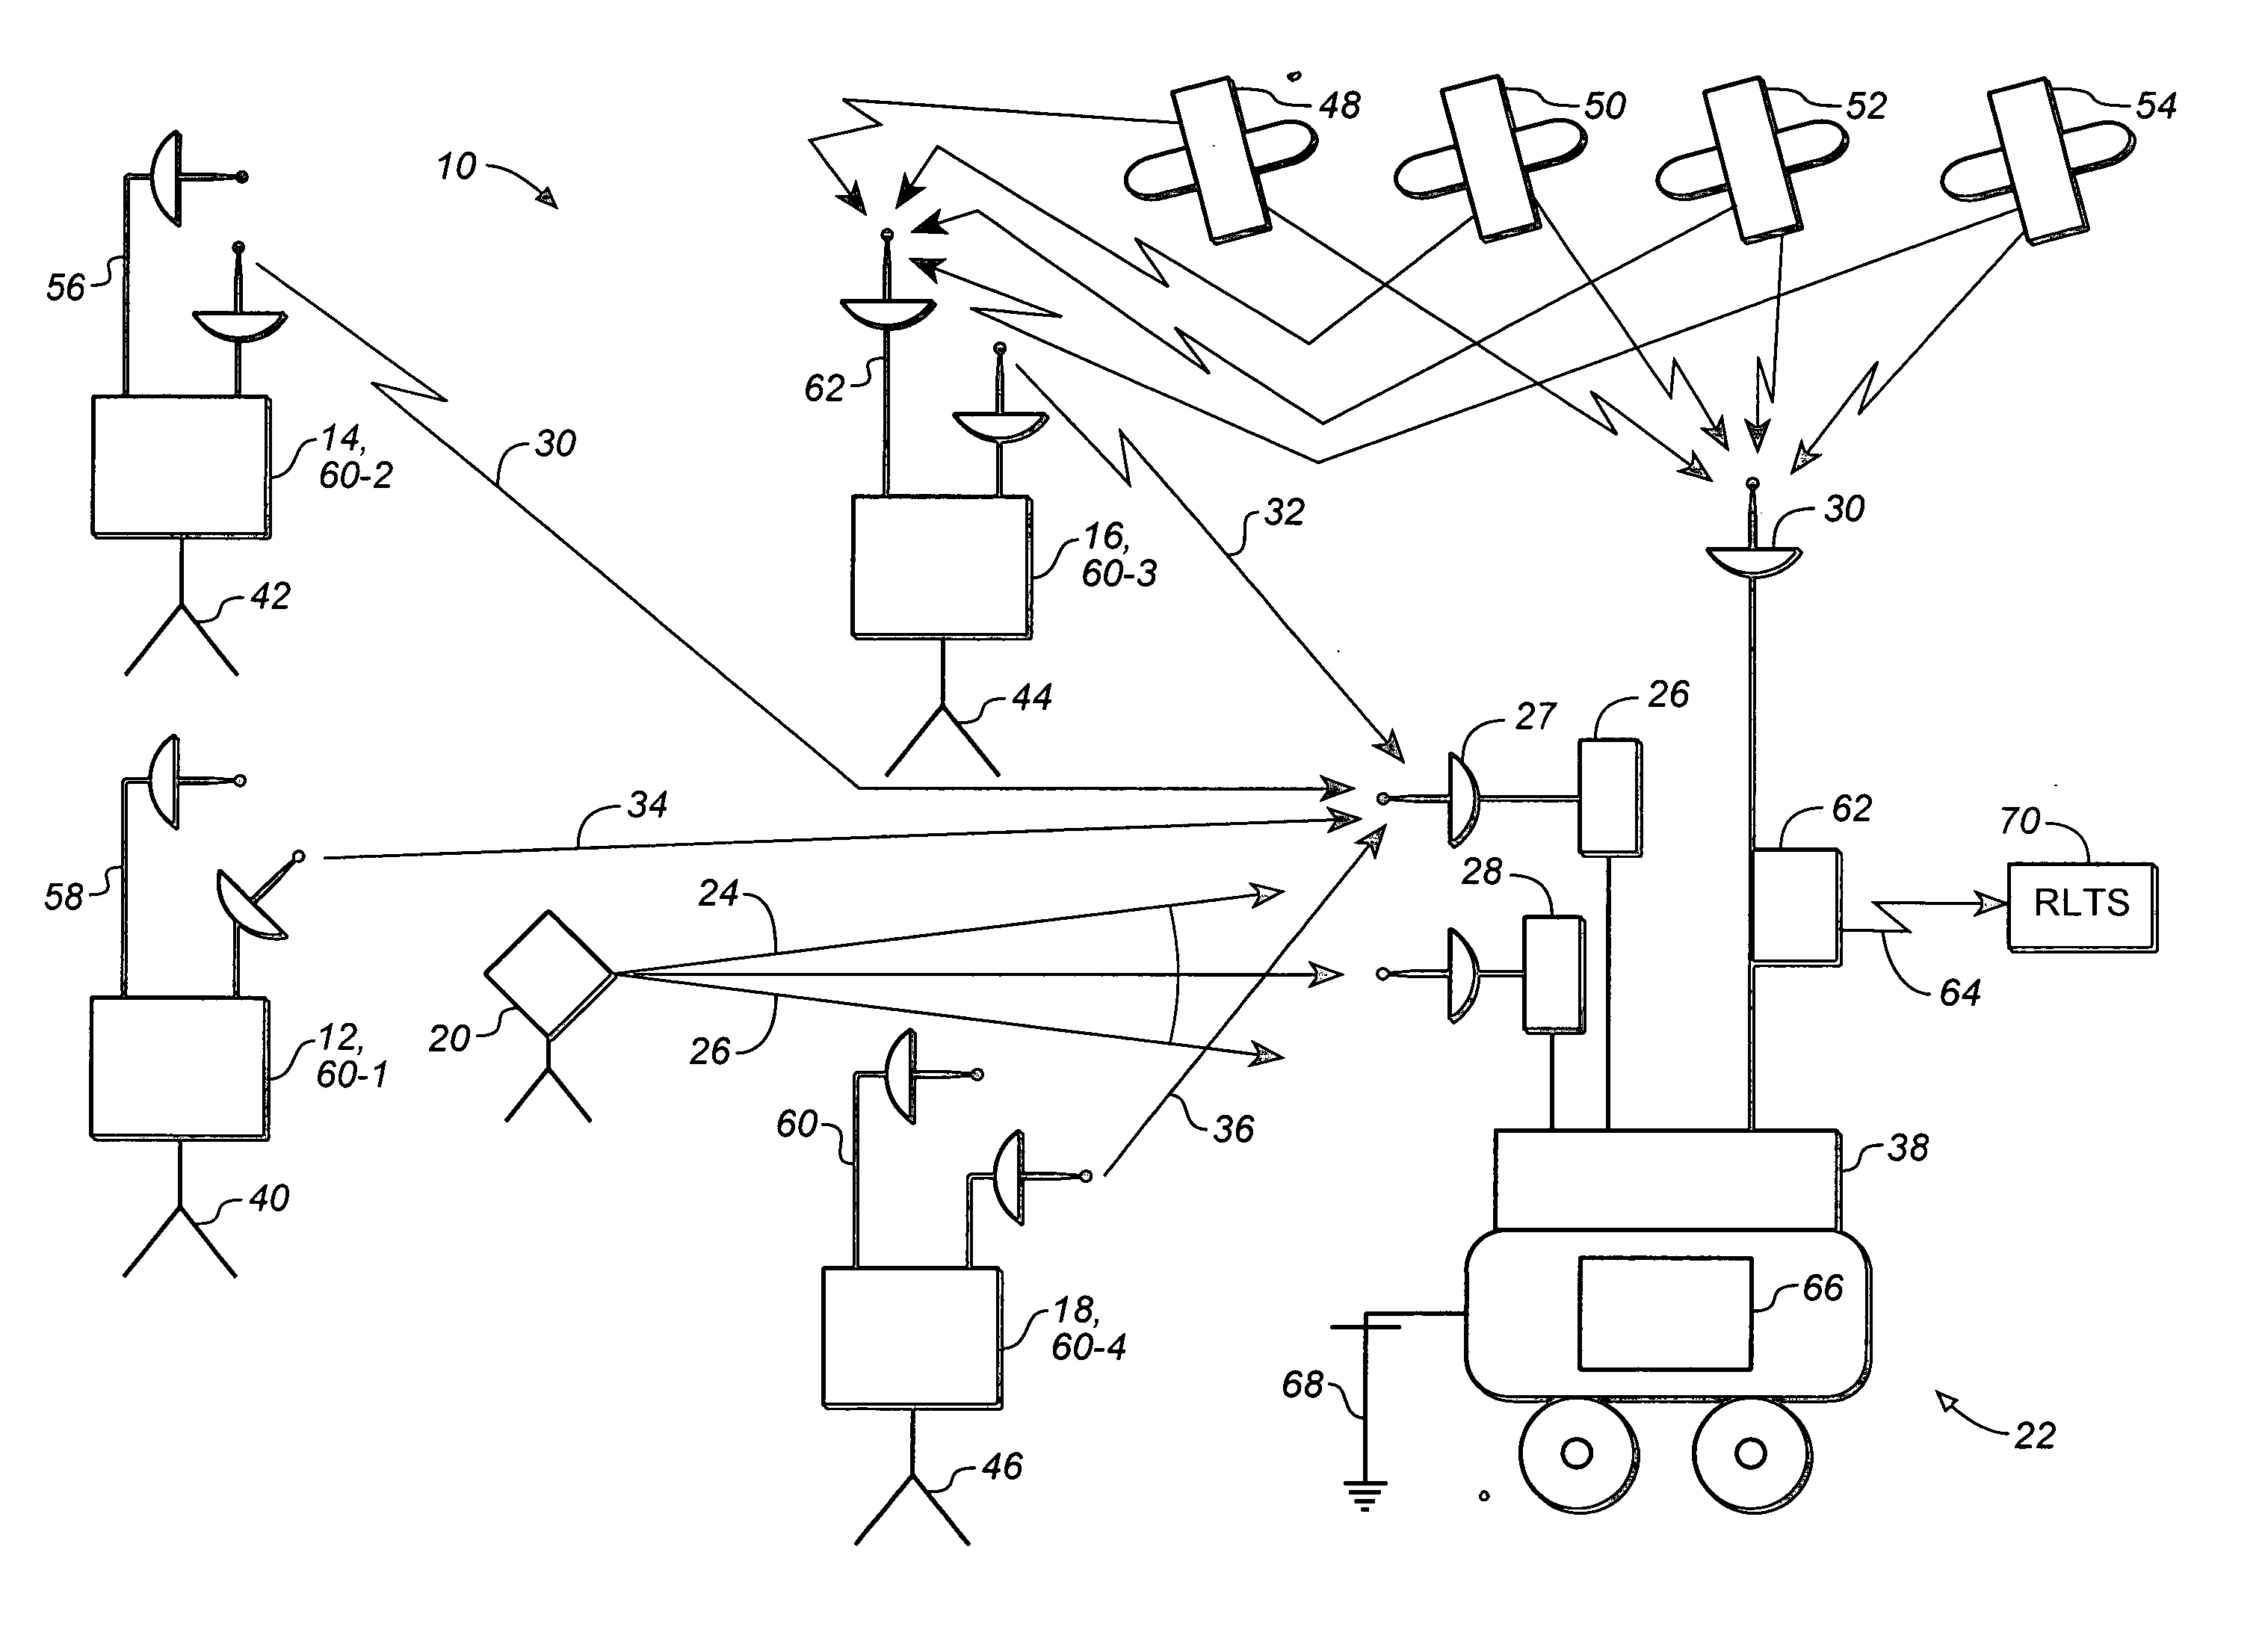 Position determination system using radio and laser in combination